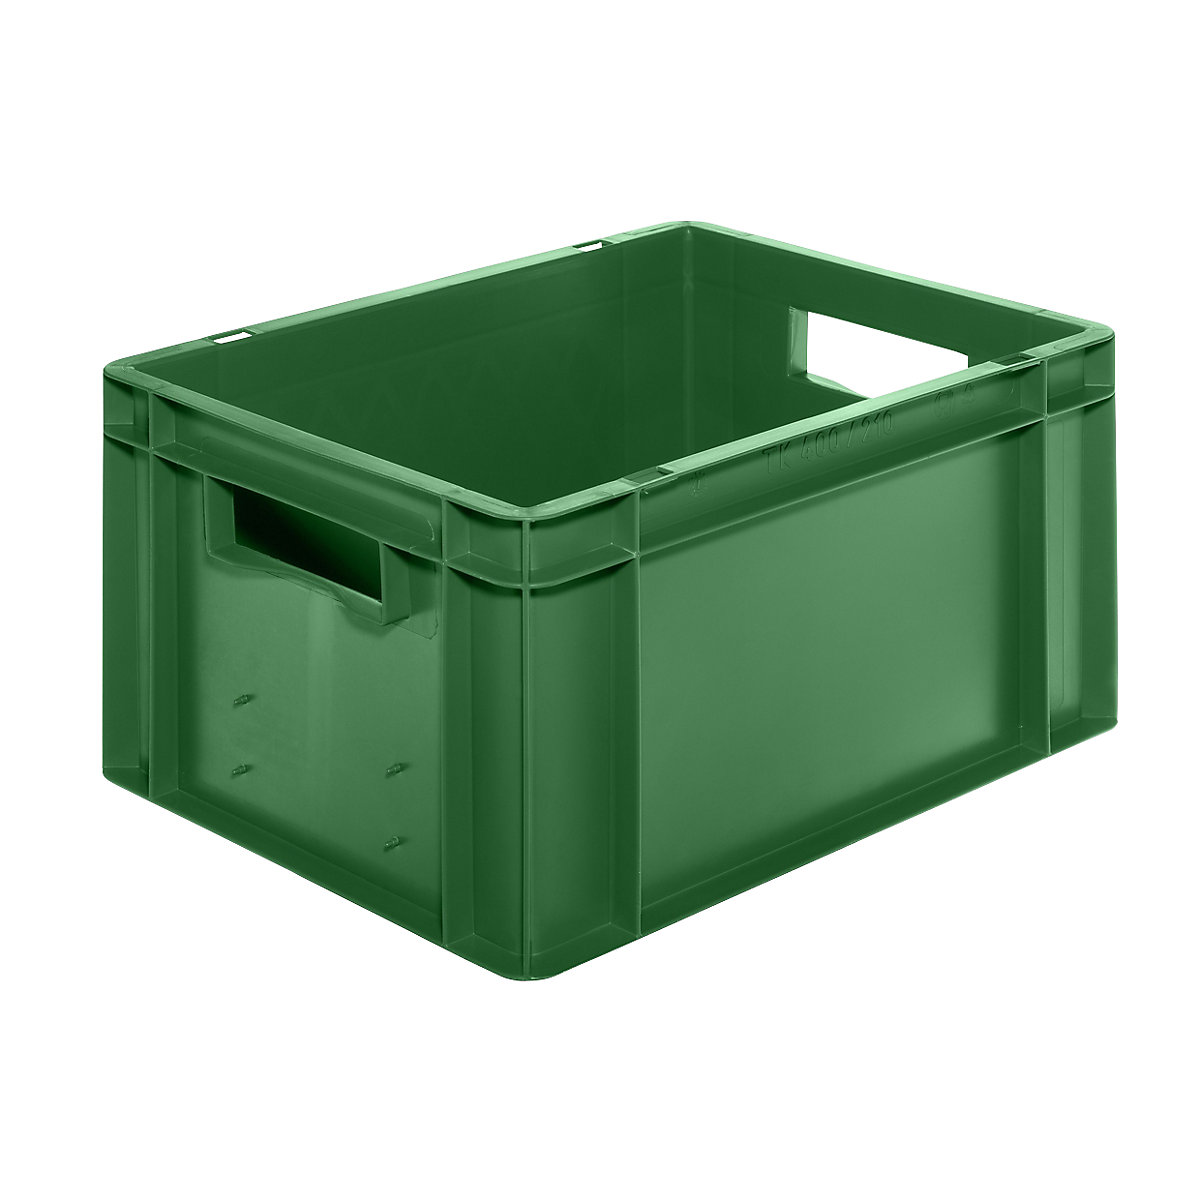 Euro stacking container, closed walls and base, LxWxH 400 x 300 x 210 mm, green, pack of 5